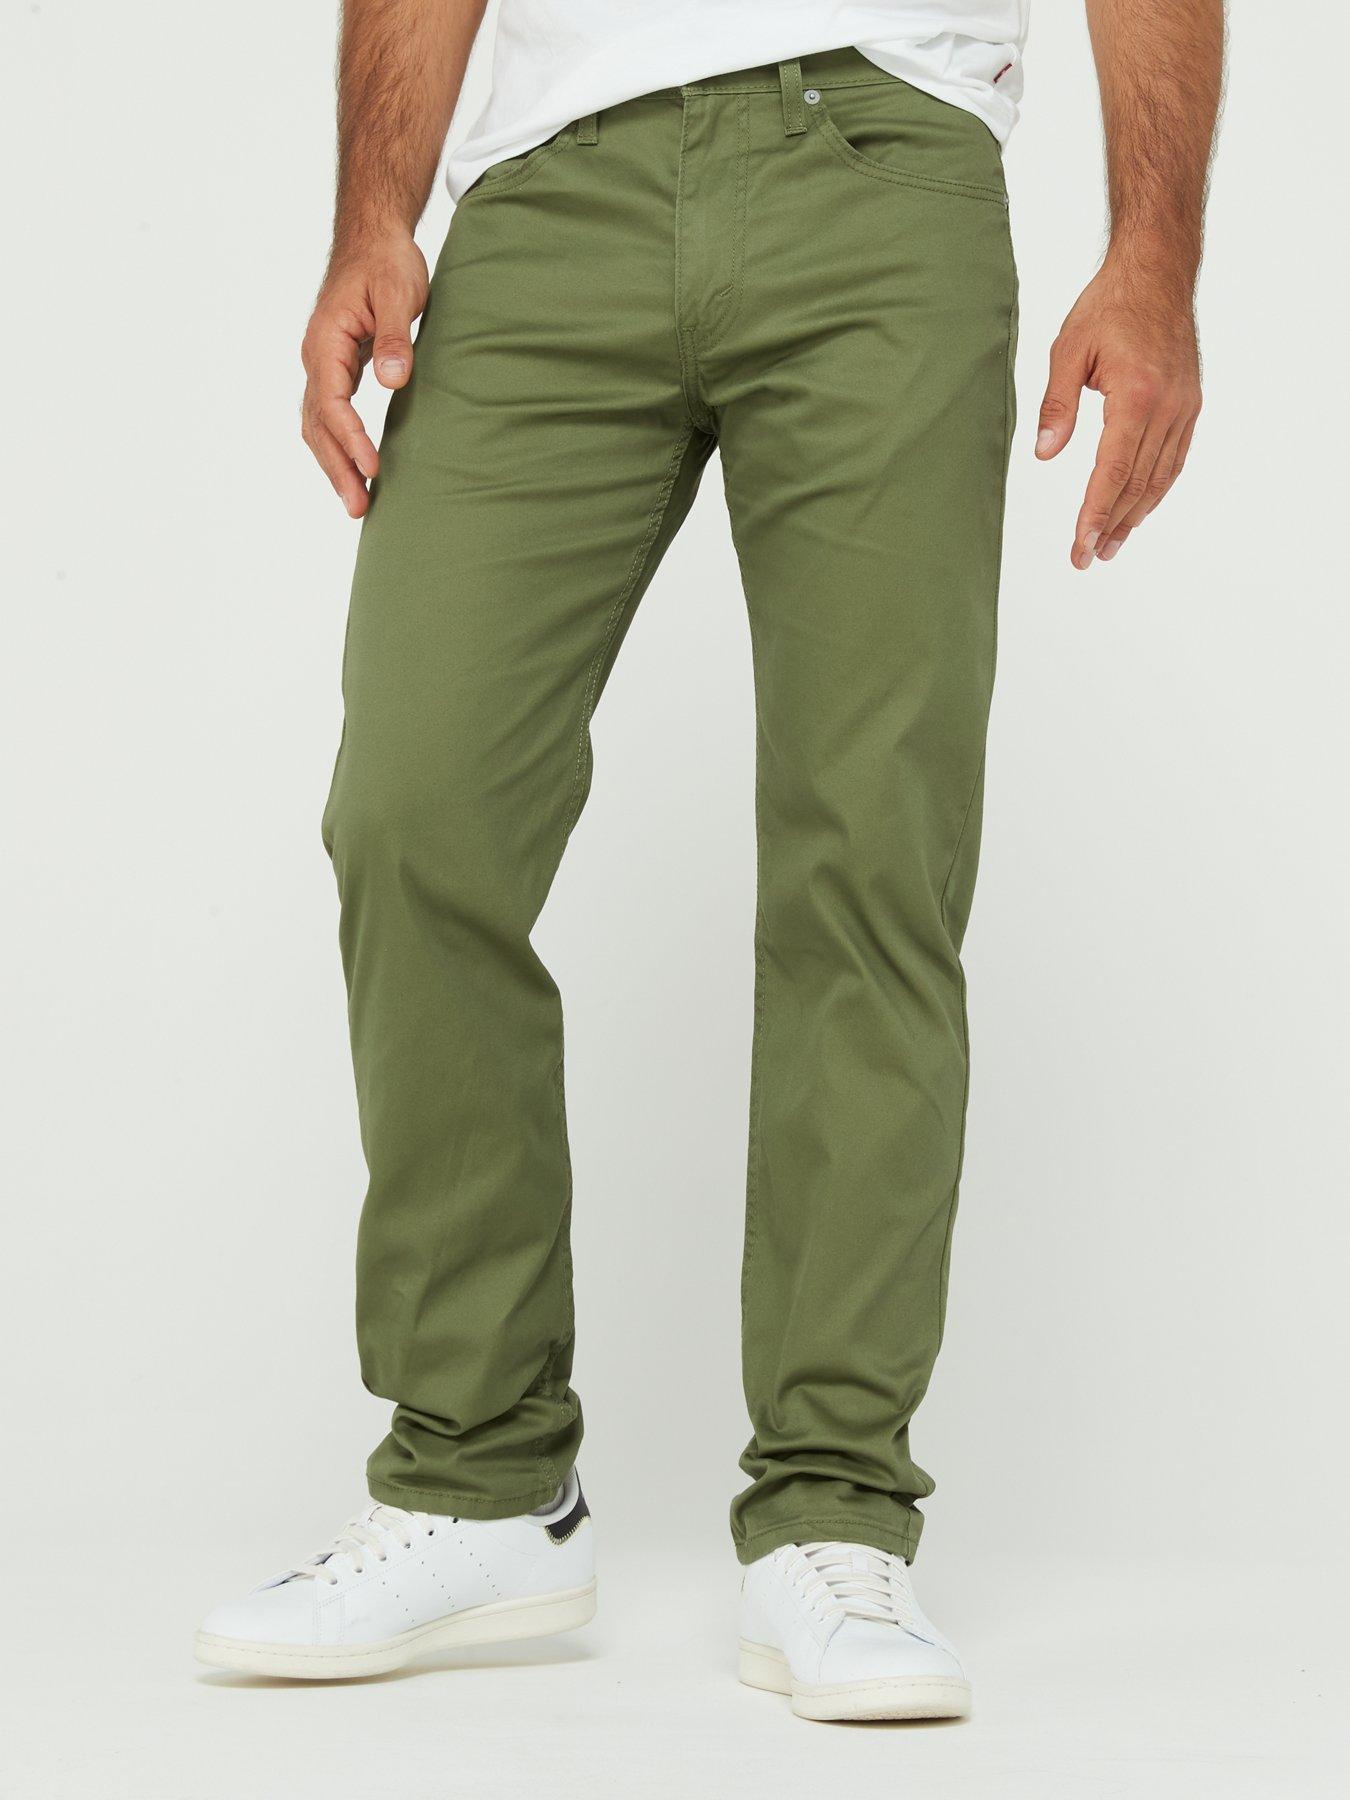 Levi's ™ Tapered Fit Jeans   Bluish Olive   Green   very.co.uk